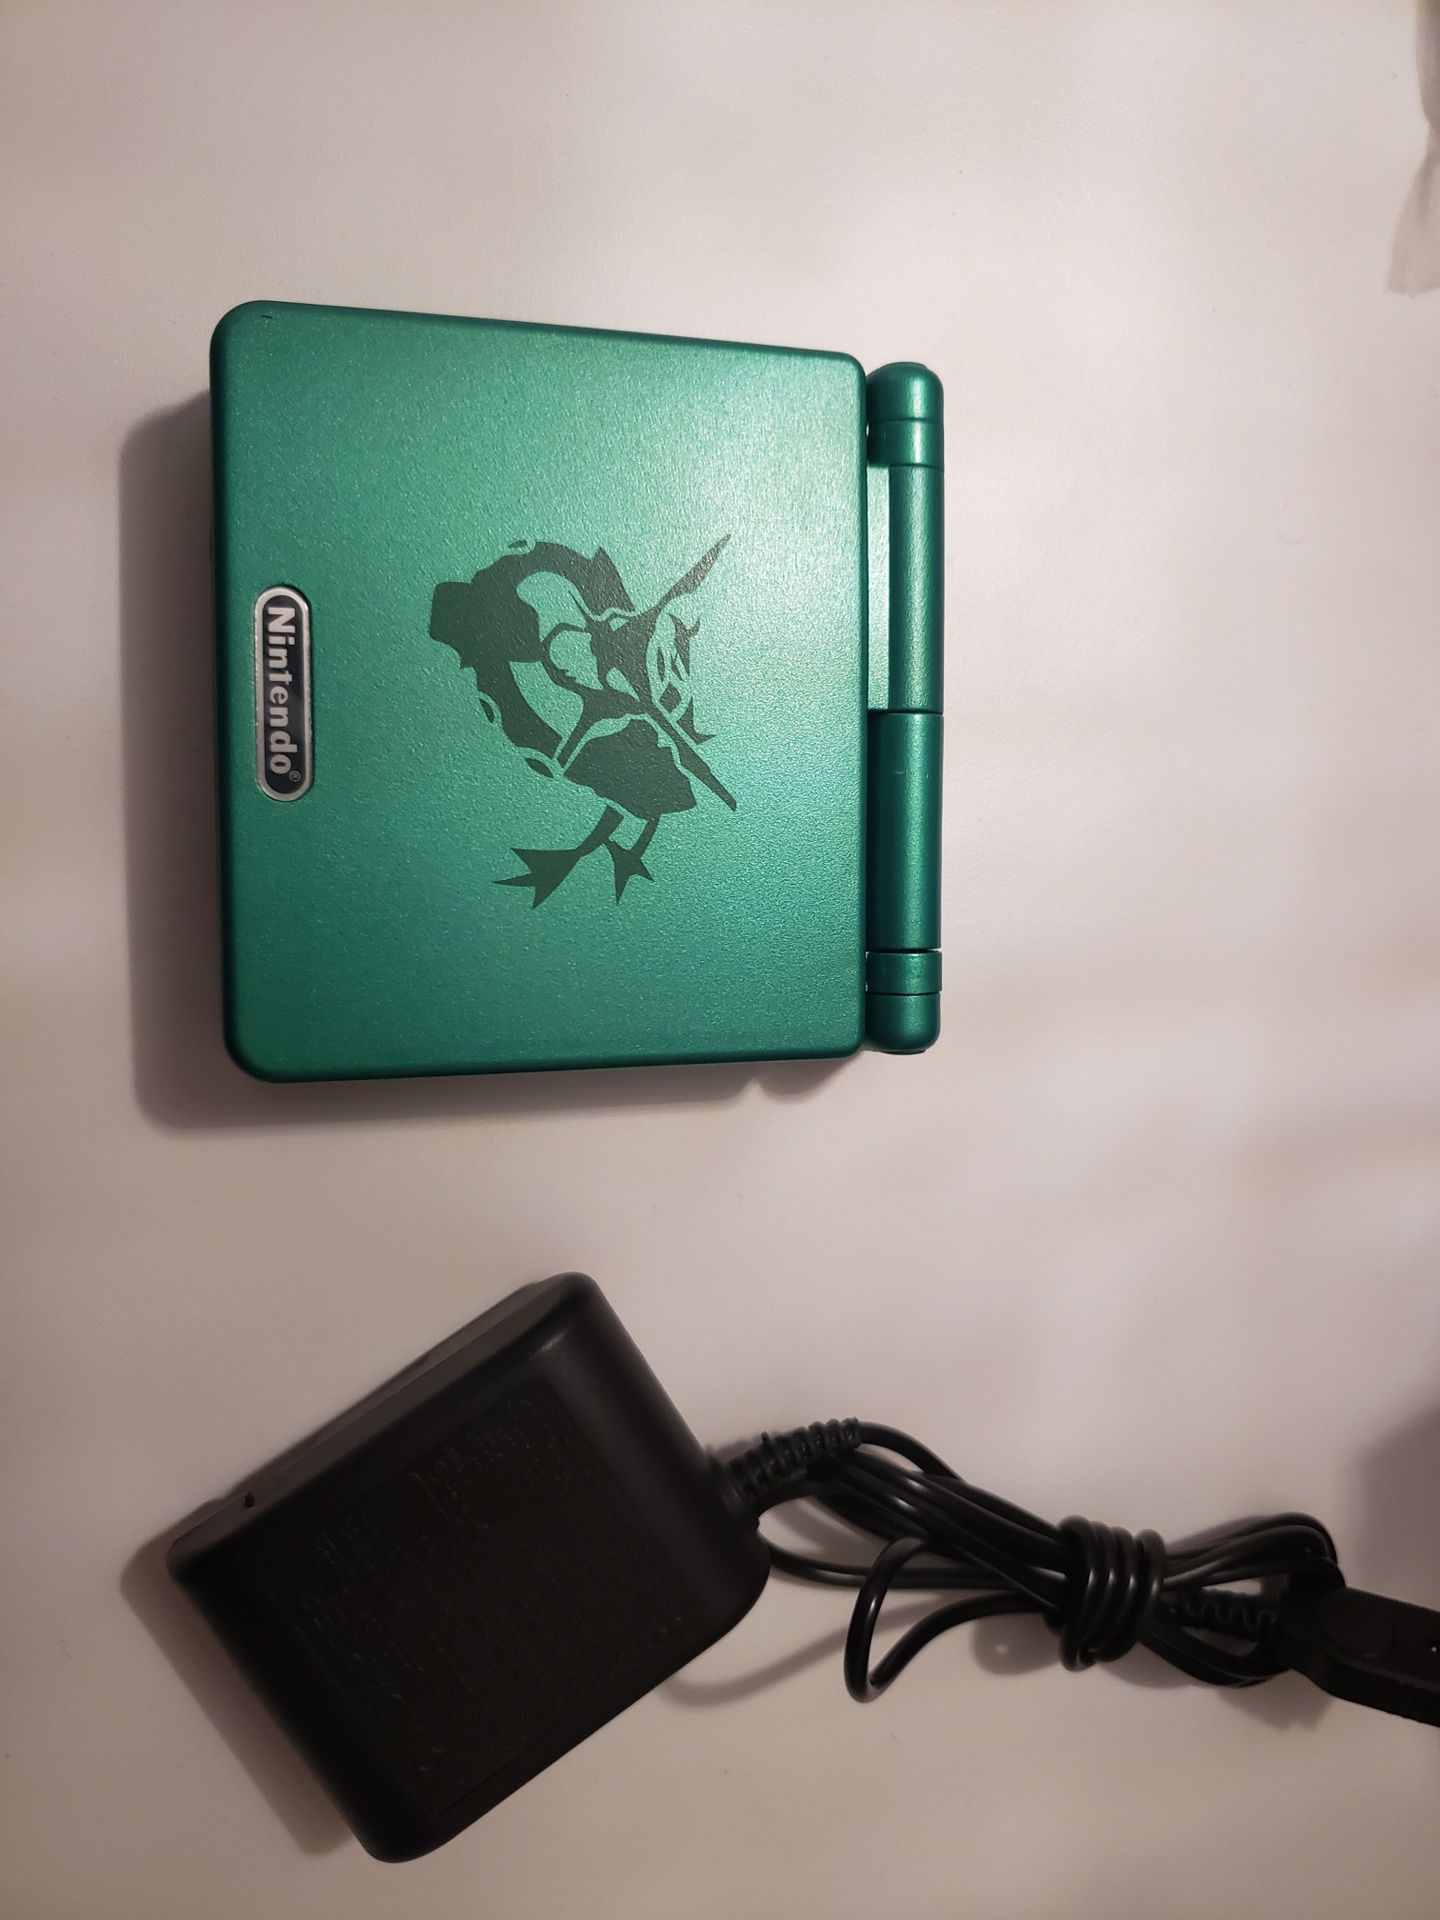 Gameboy advance sp rayquaza edition